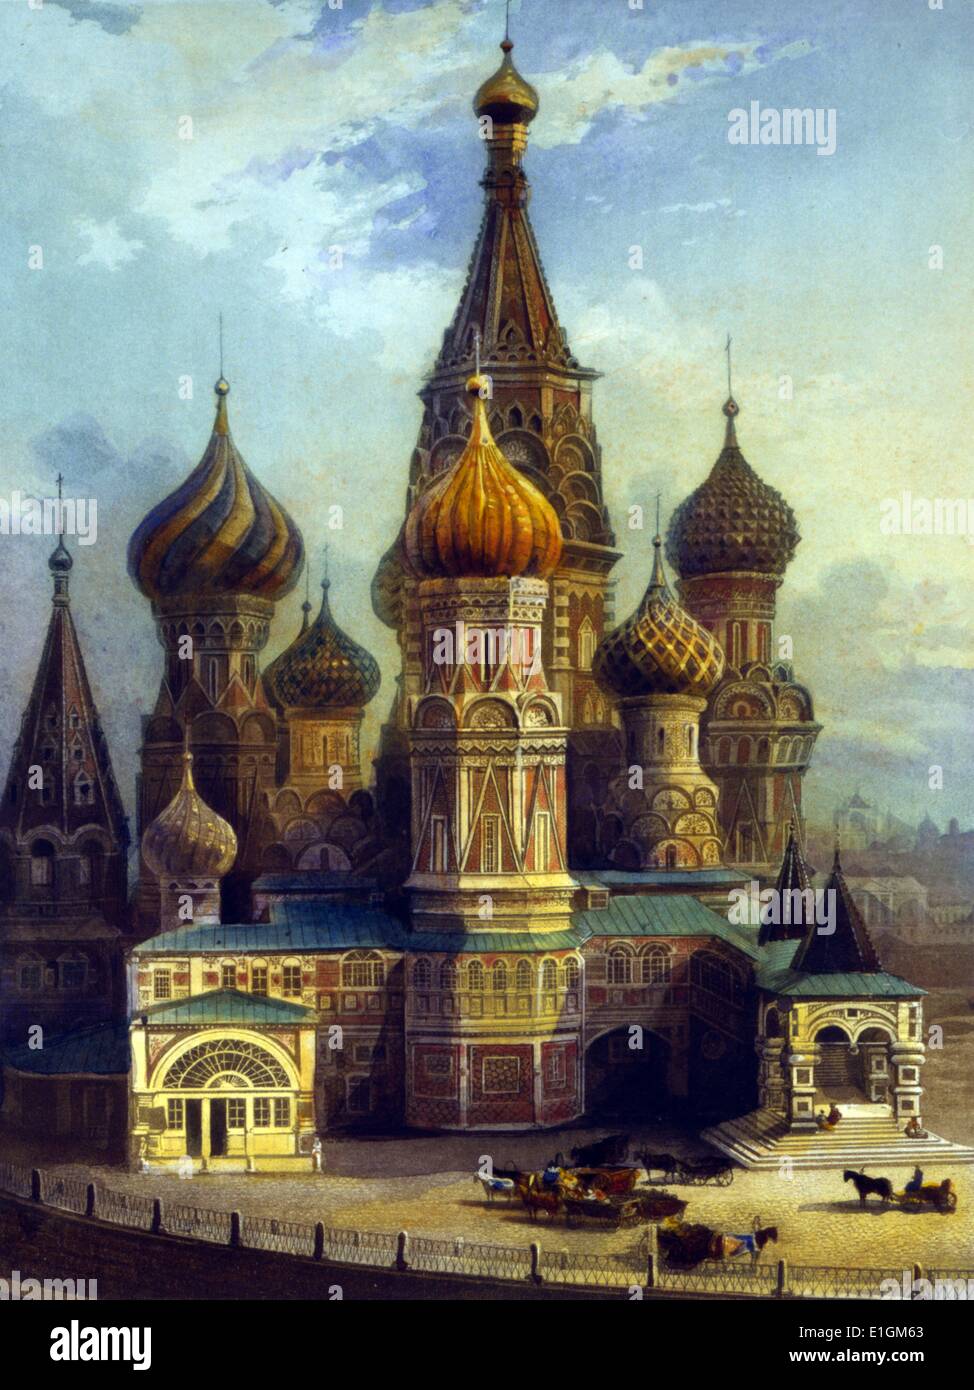 Church of St. Basil, Moscow Russia. etching and aquatint, in colour, based on a daguérreotype photographed by Noël Paymal Lerebours, 1807-1873 Stock Photo